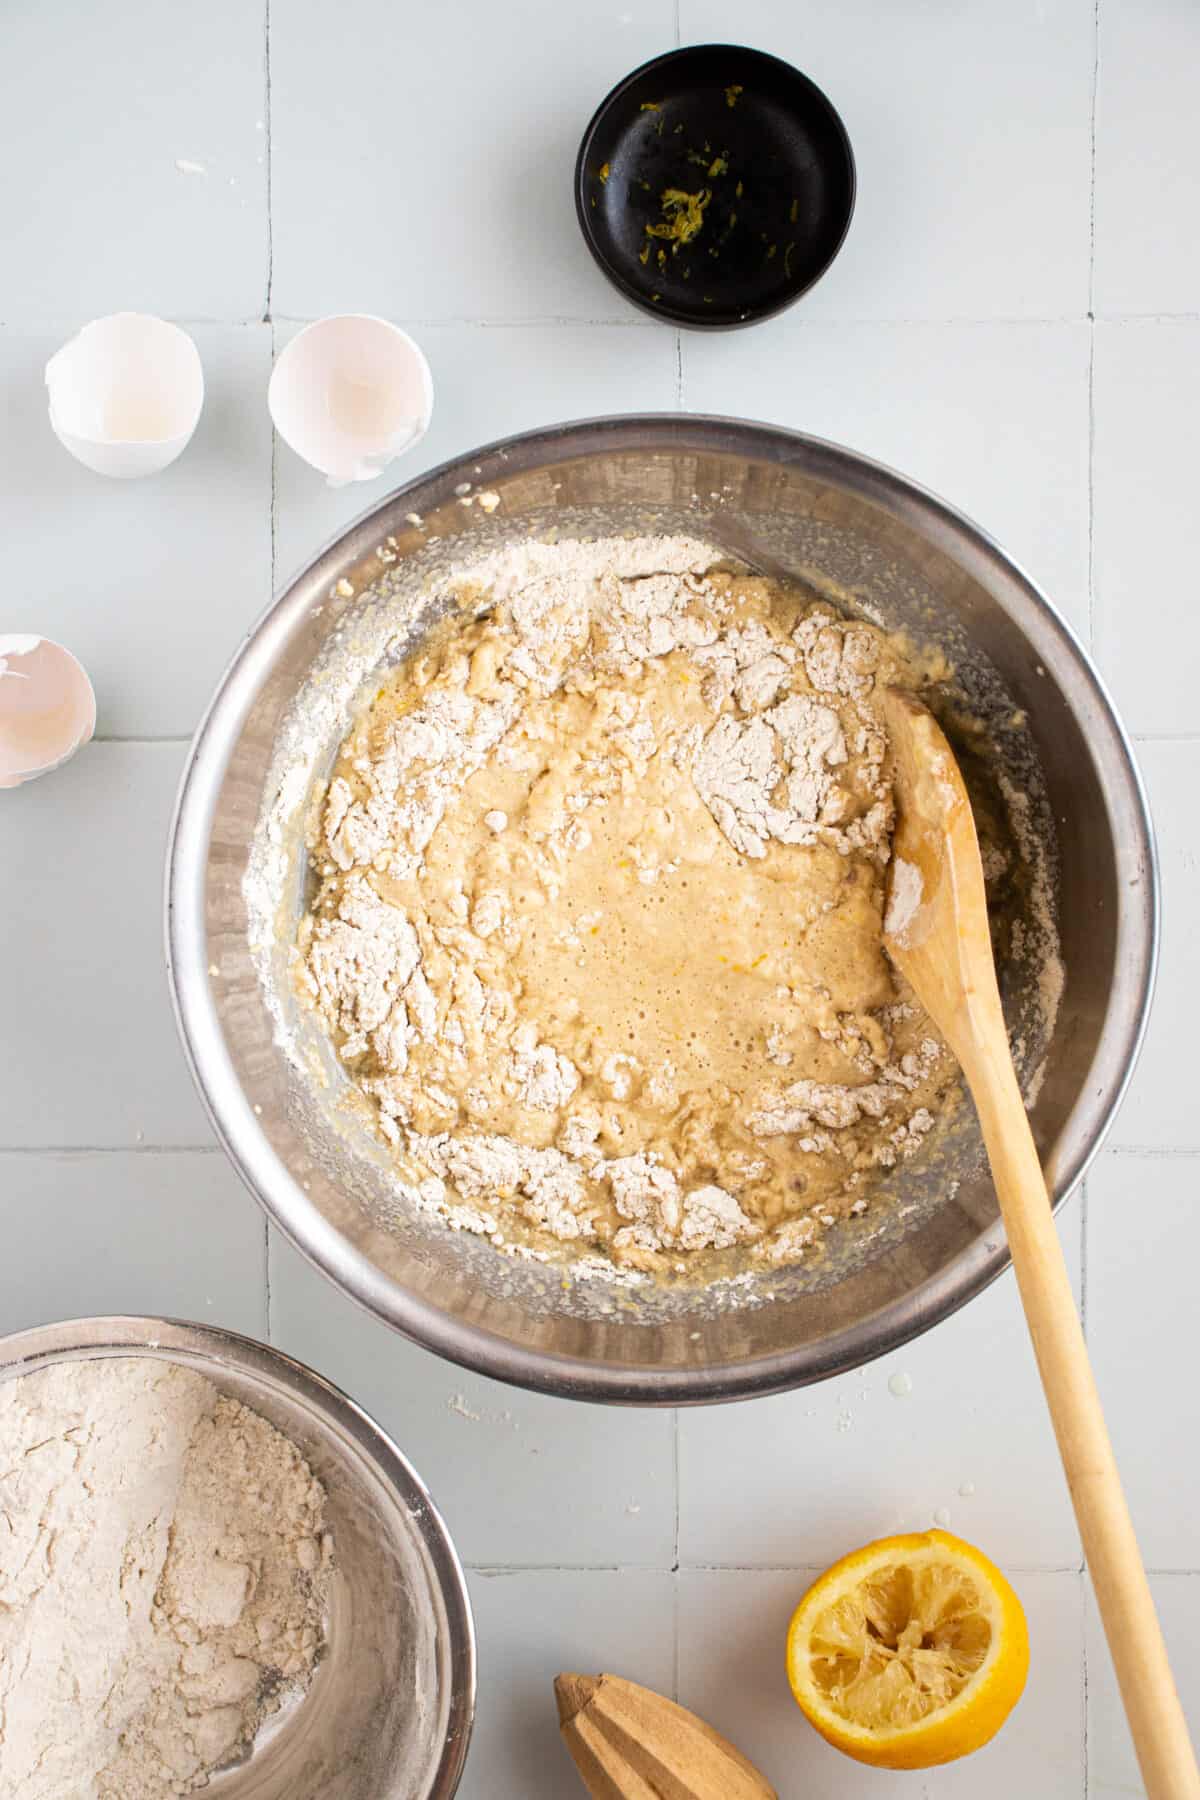 Wooden spoon stirring muffin batter in a bowl.